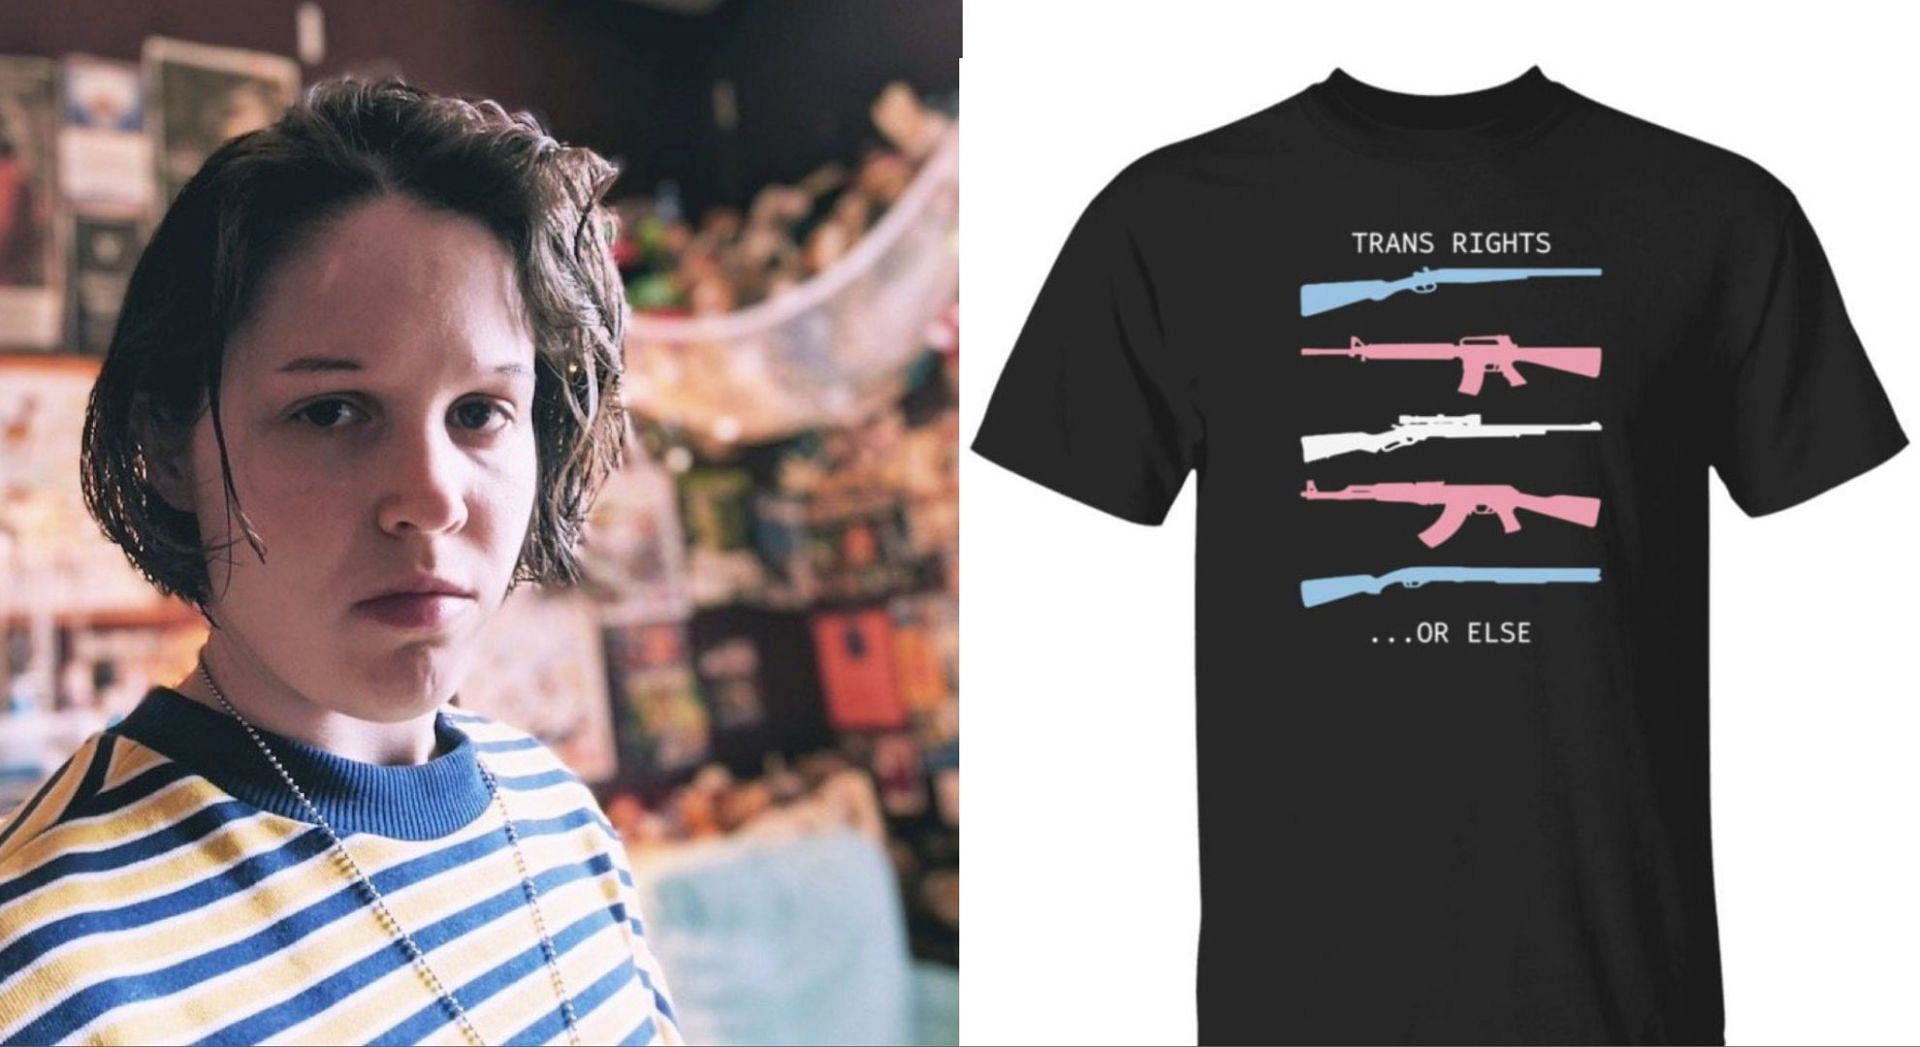 &quot;Trans Rights or Else&quot; shirts on Amazon sparked major controversy in the wake of Nashville school shooting (Image via Audrey Hale/LinkedIn and Alejandro Miguelsky/Twitter)